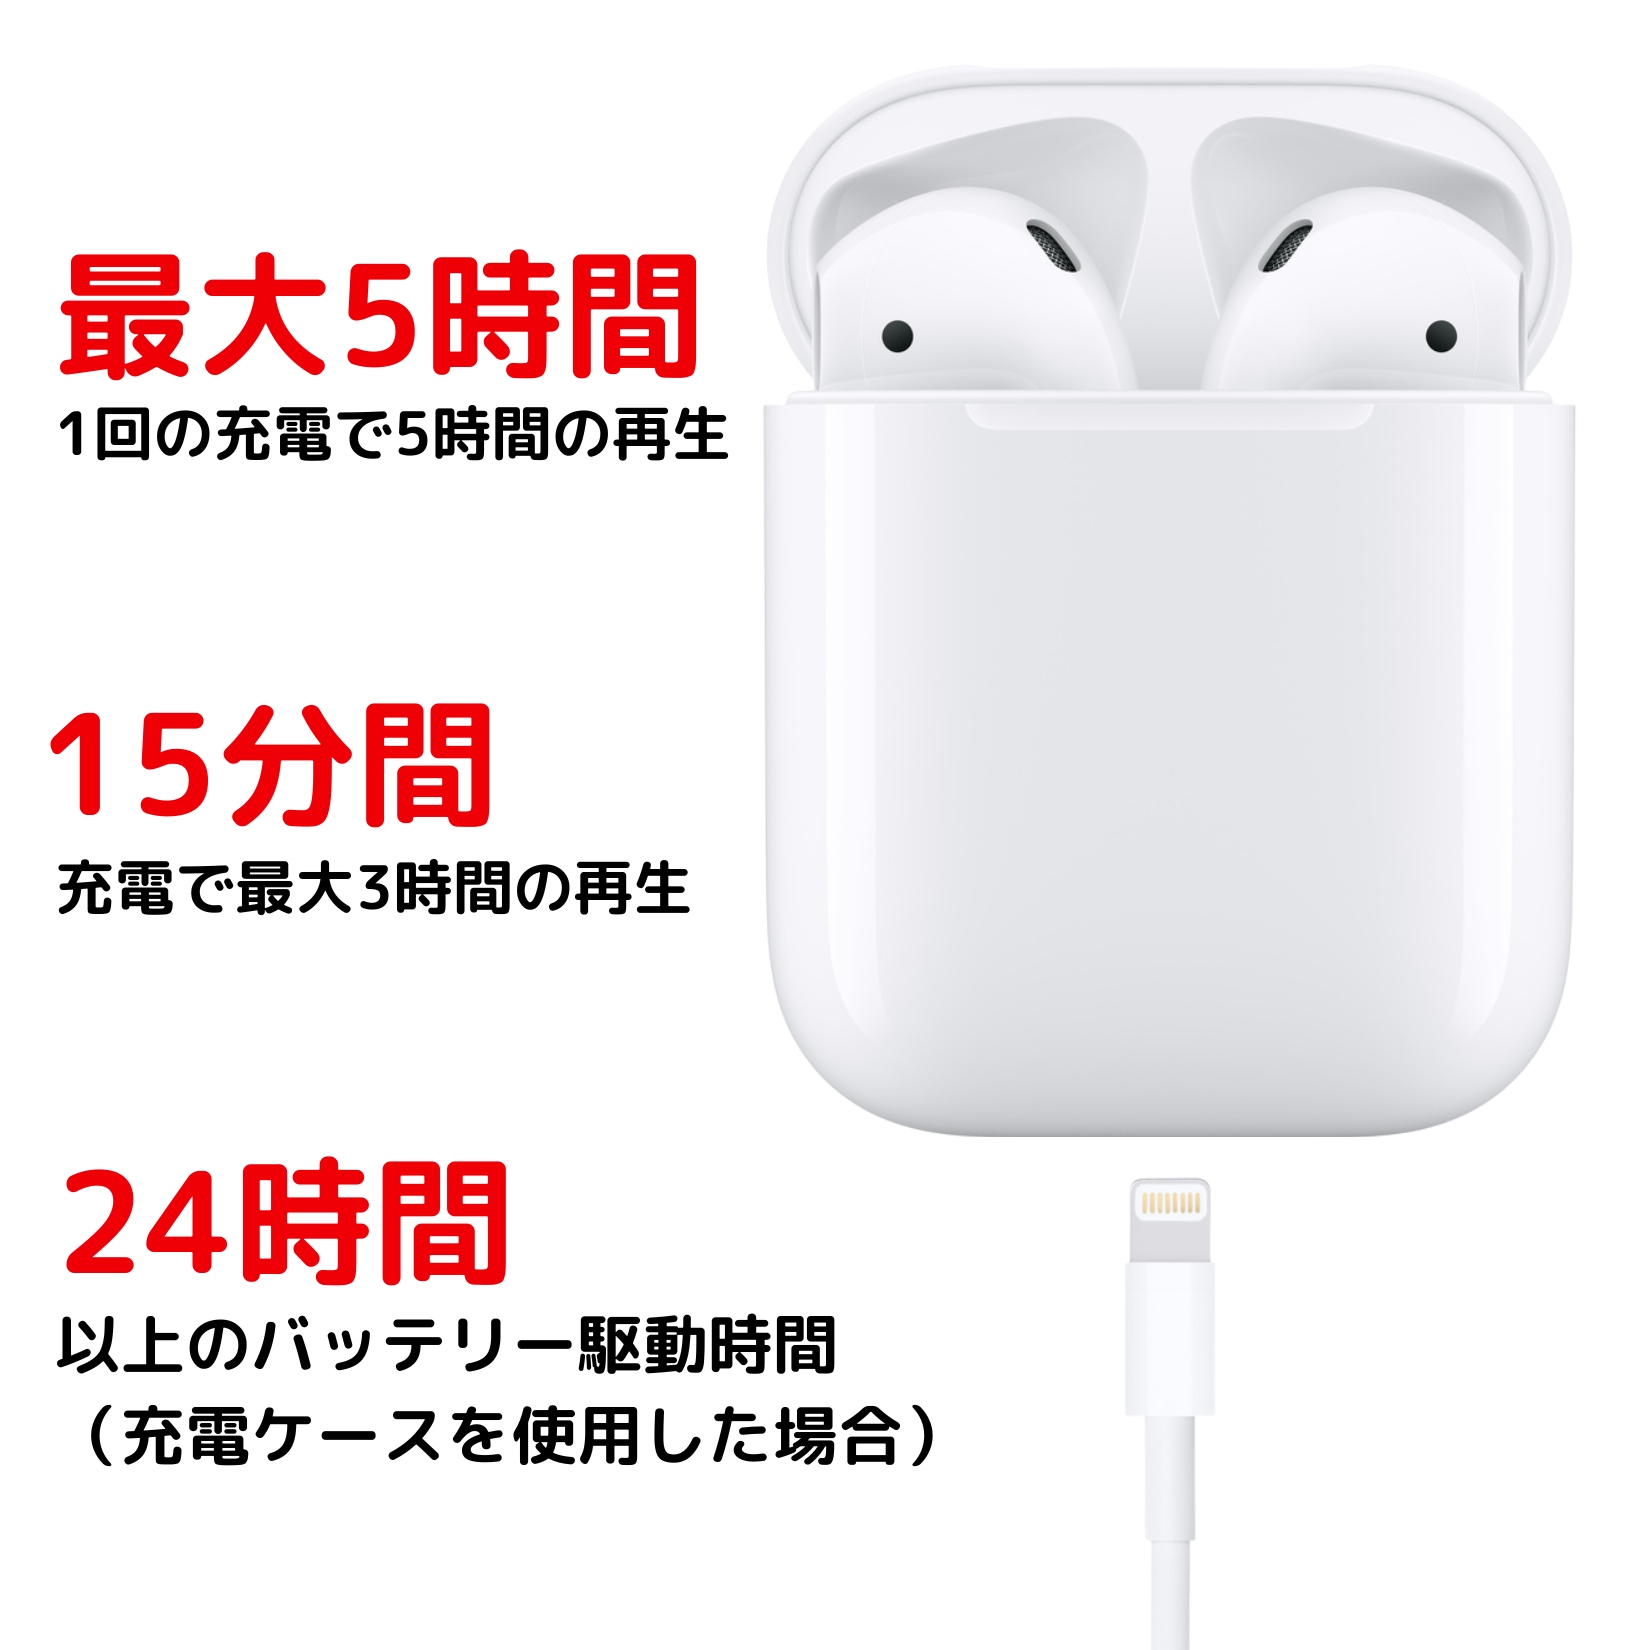 Apple AirPods with Charging Case 第2世代 MV7N2J/A 4549995069389